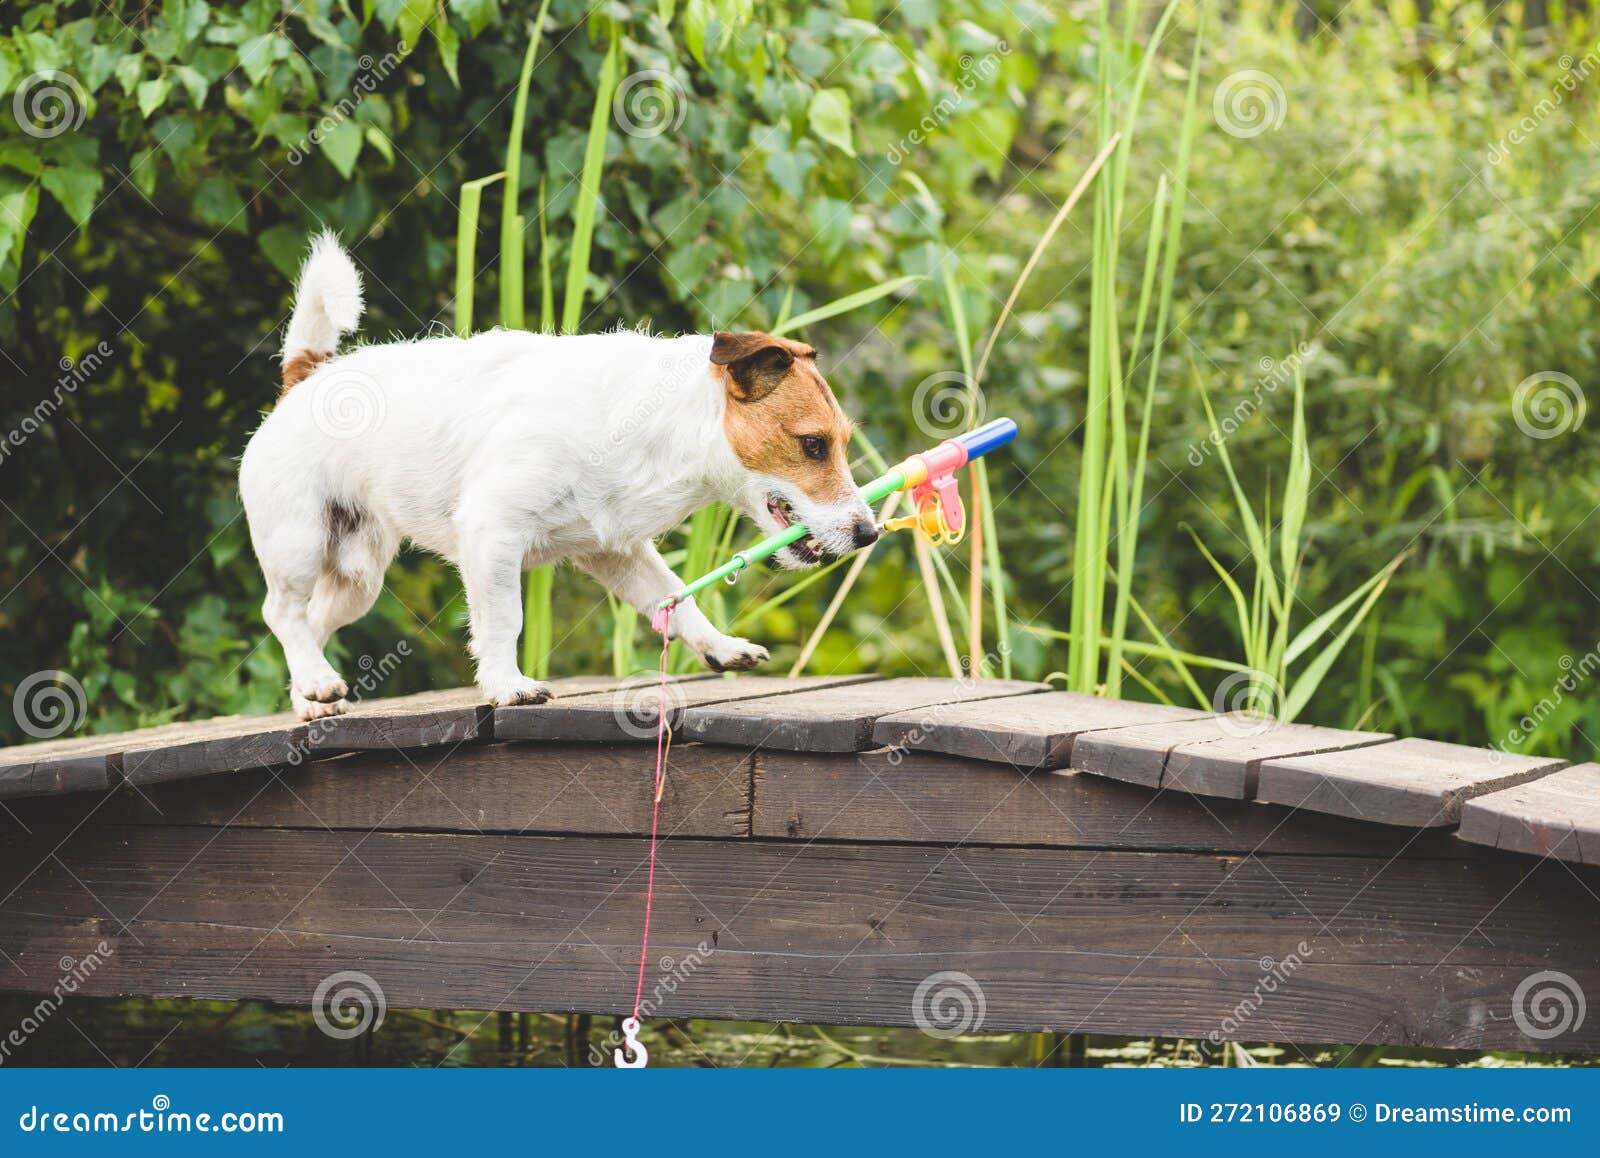 Dog As Funny Fisherman with Toy Fishing Rod Going To Catch Fish. Humorous  Concept of Fishing As Hobby Stock Image - Image of amusing, russell:  272106869